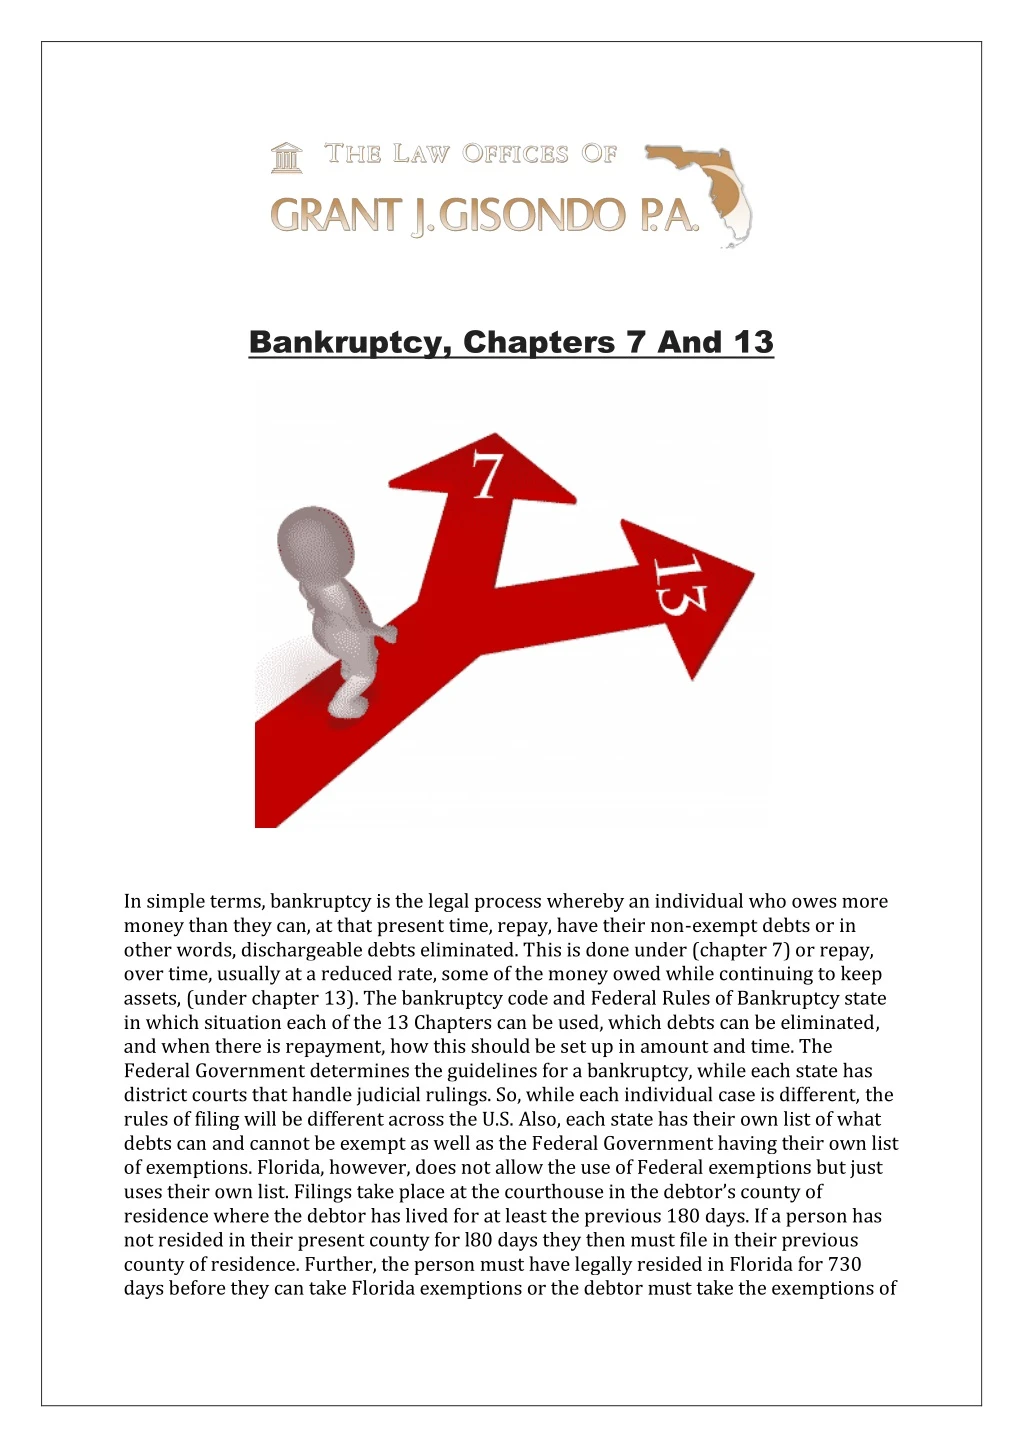 bankruptcy chapters 7 and 13